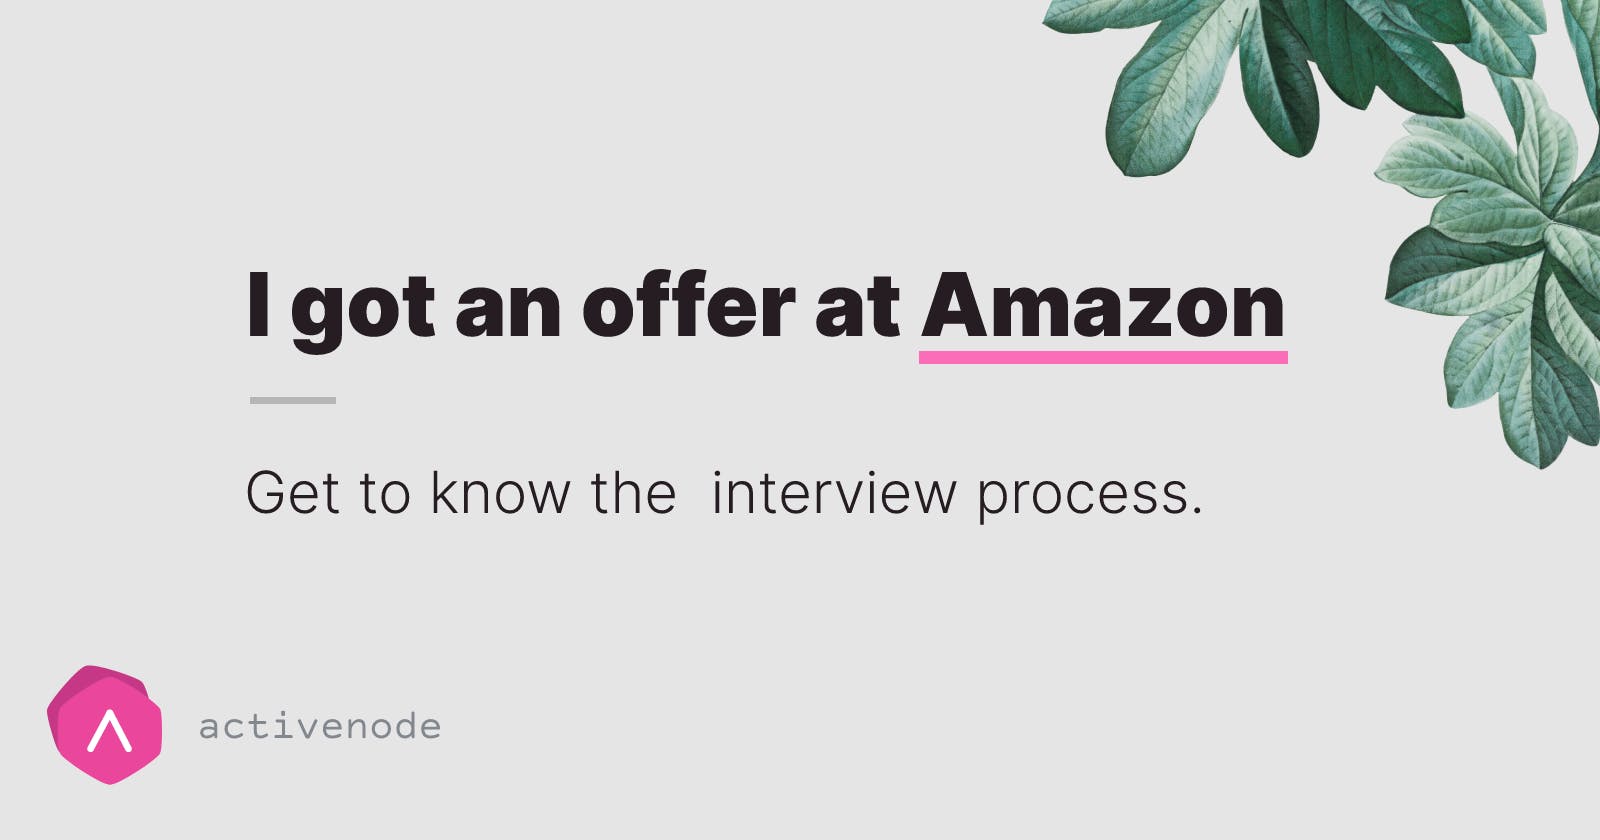 Getting interviewed at Amazon